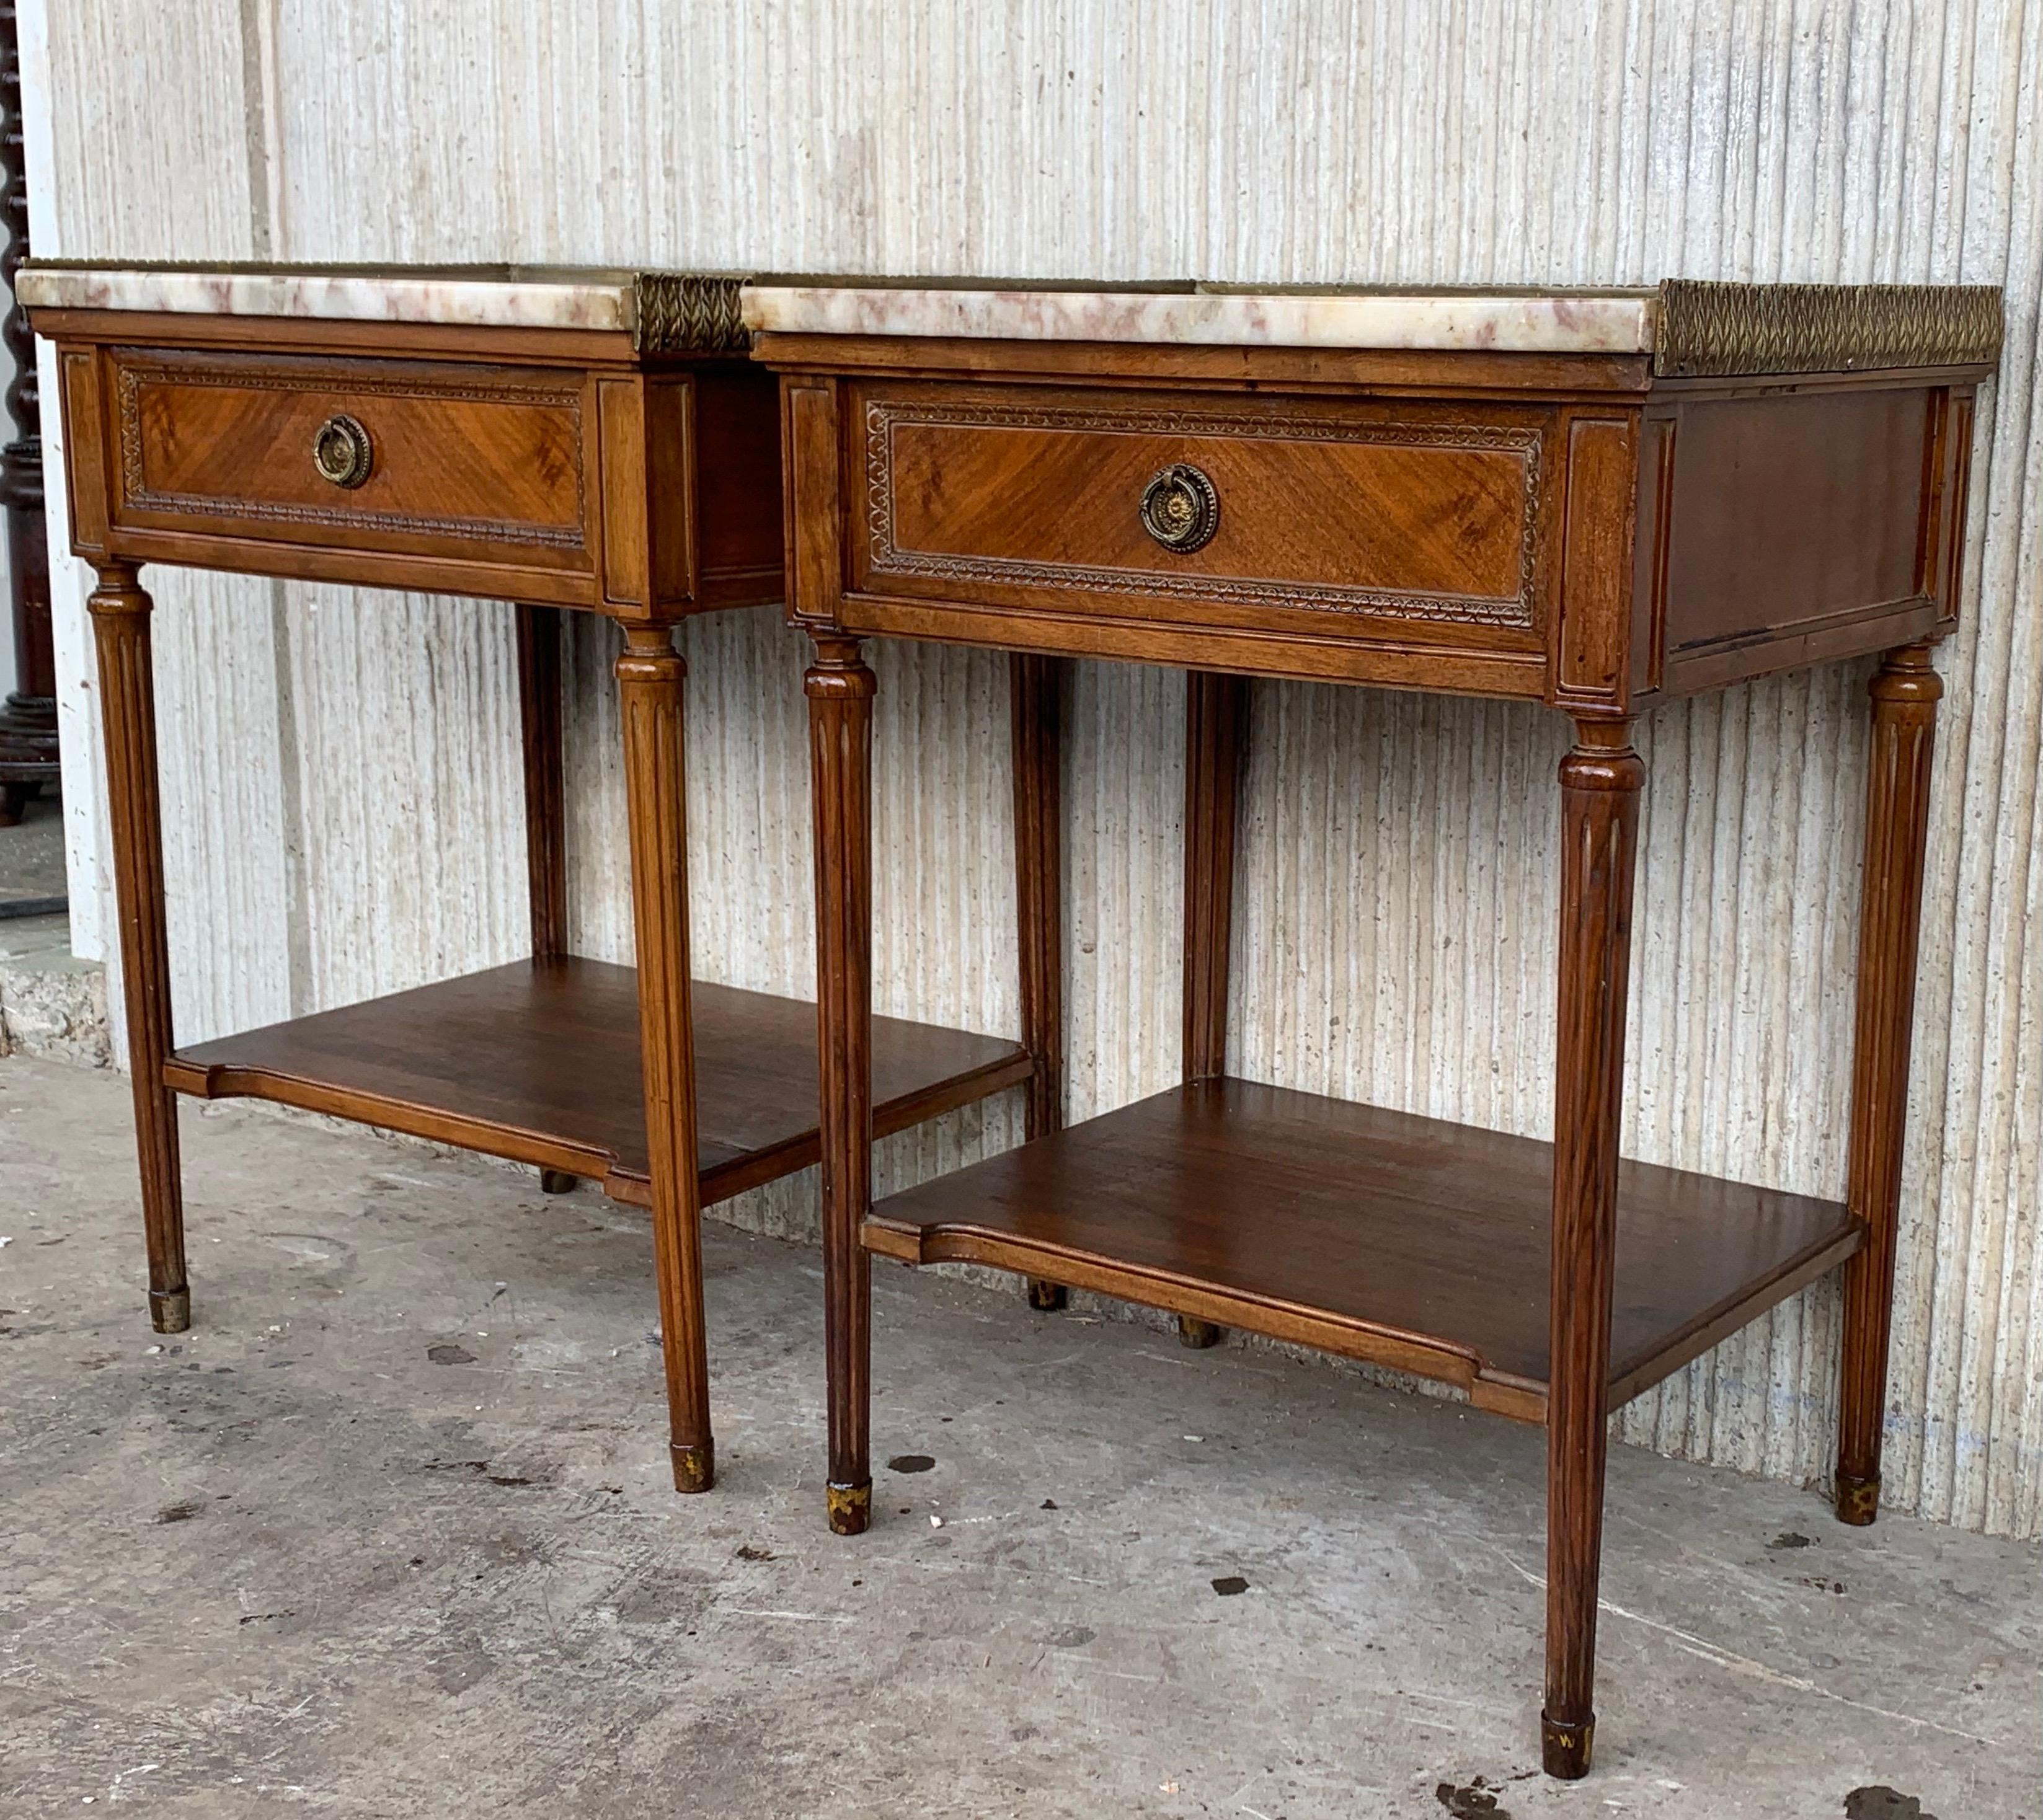 Early 20th century pair of nightstands with one-drawer and bronze bordering marble top.